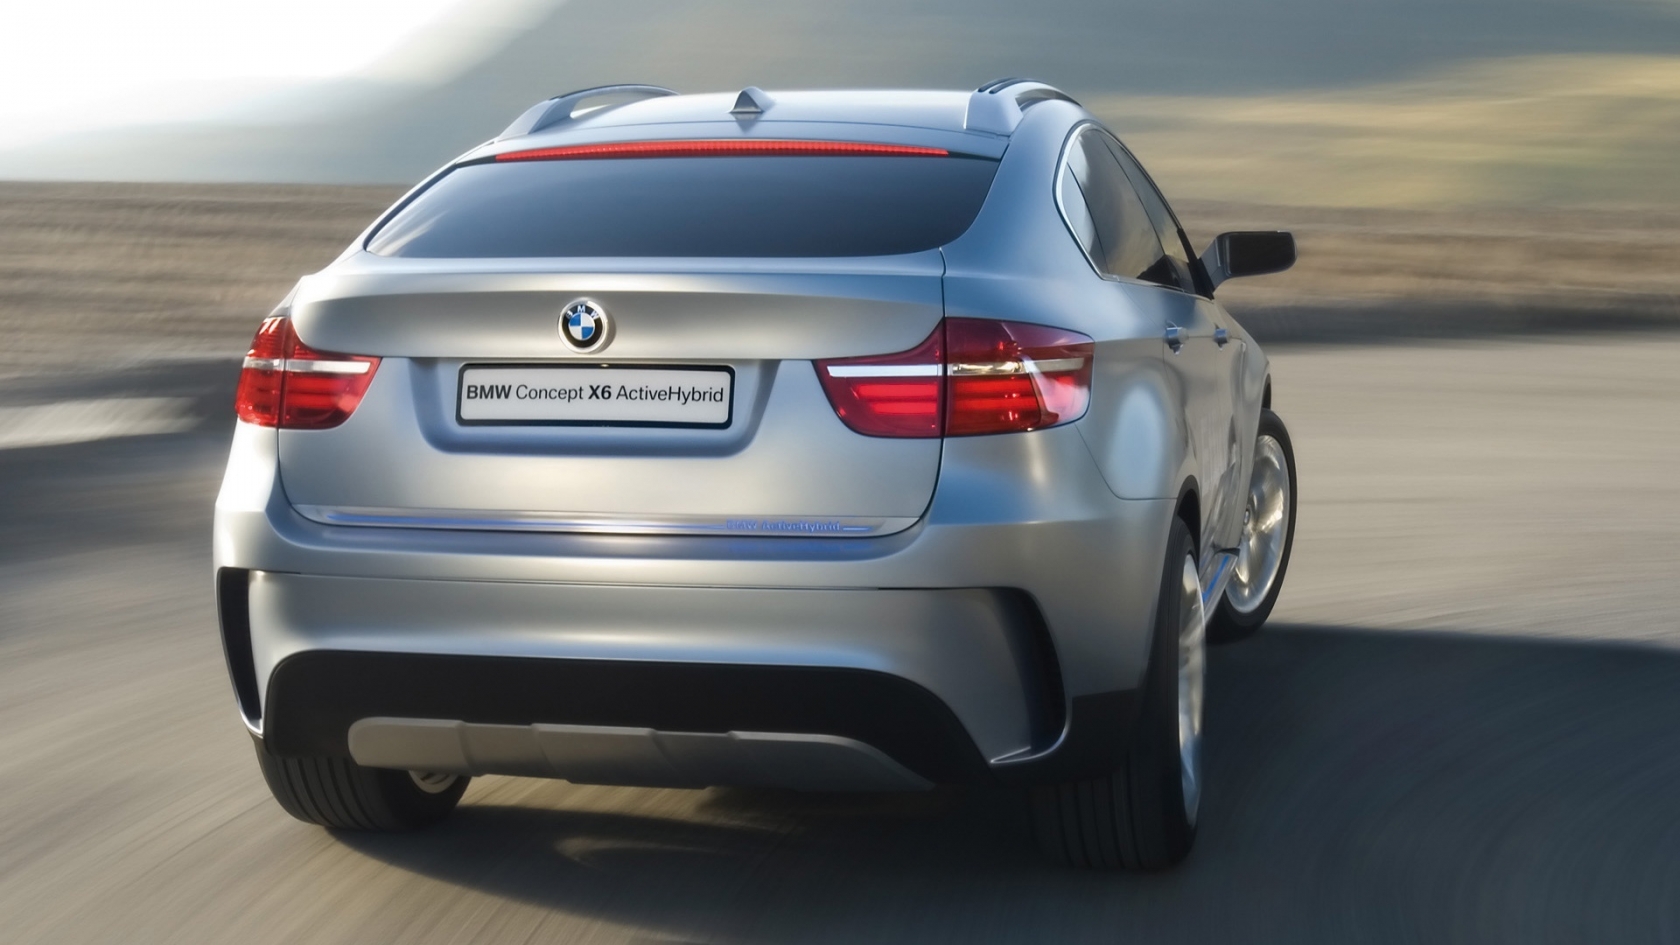 BMW Concept X6 ActiveHybrid Rear 2007 for 1680 x 945 HDTV resolution